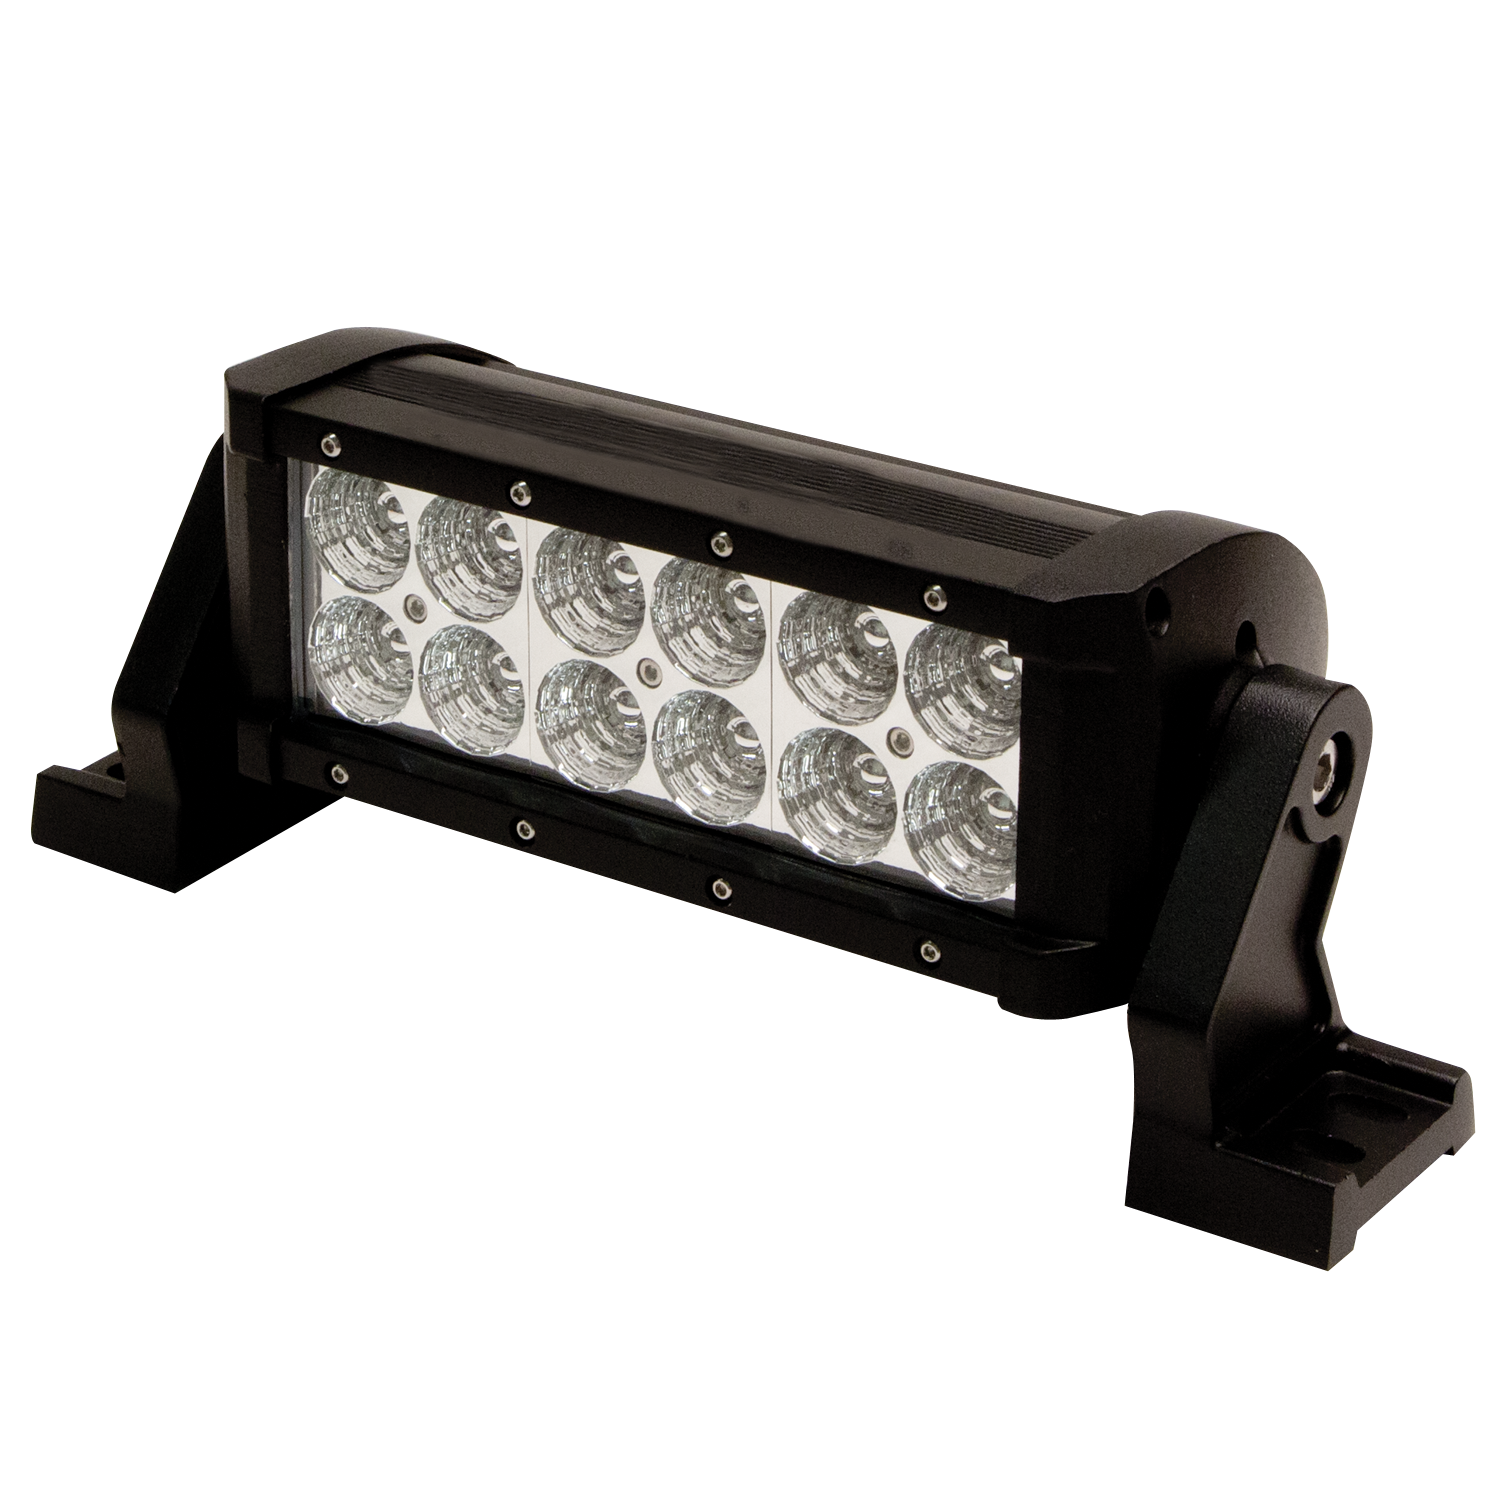 Code 3 Pursuit LED Light Bar, Dual Levels of Lighting Create Unique & Intense Flash Patterns, Choose 42 47/53 inch Mounting Hardware